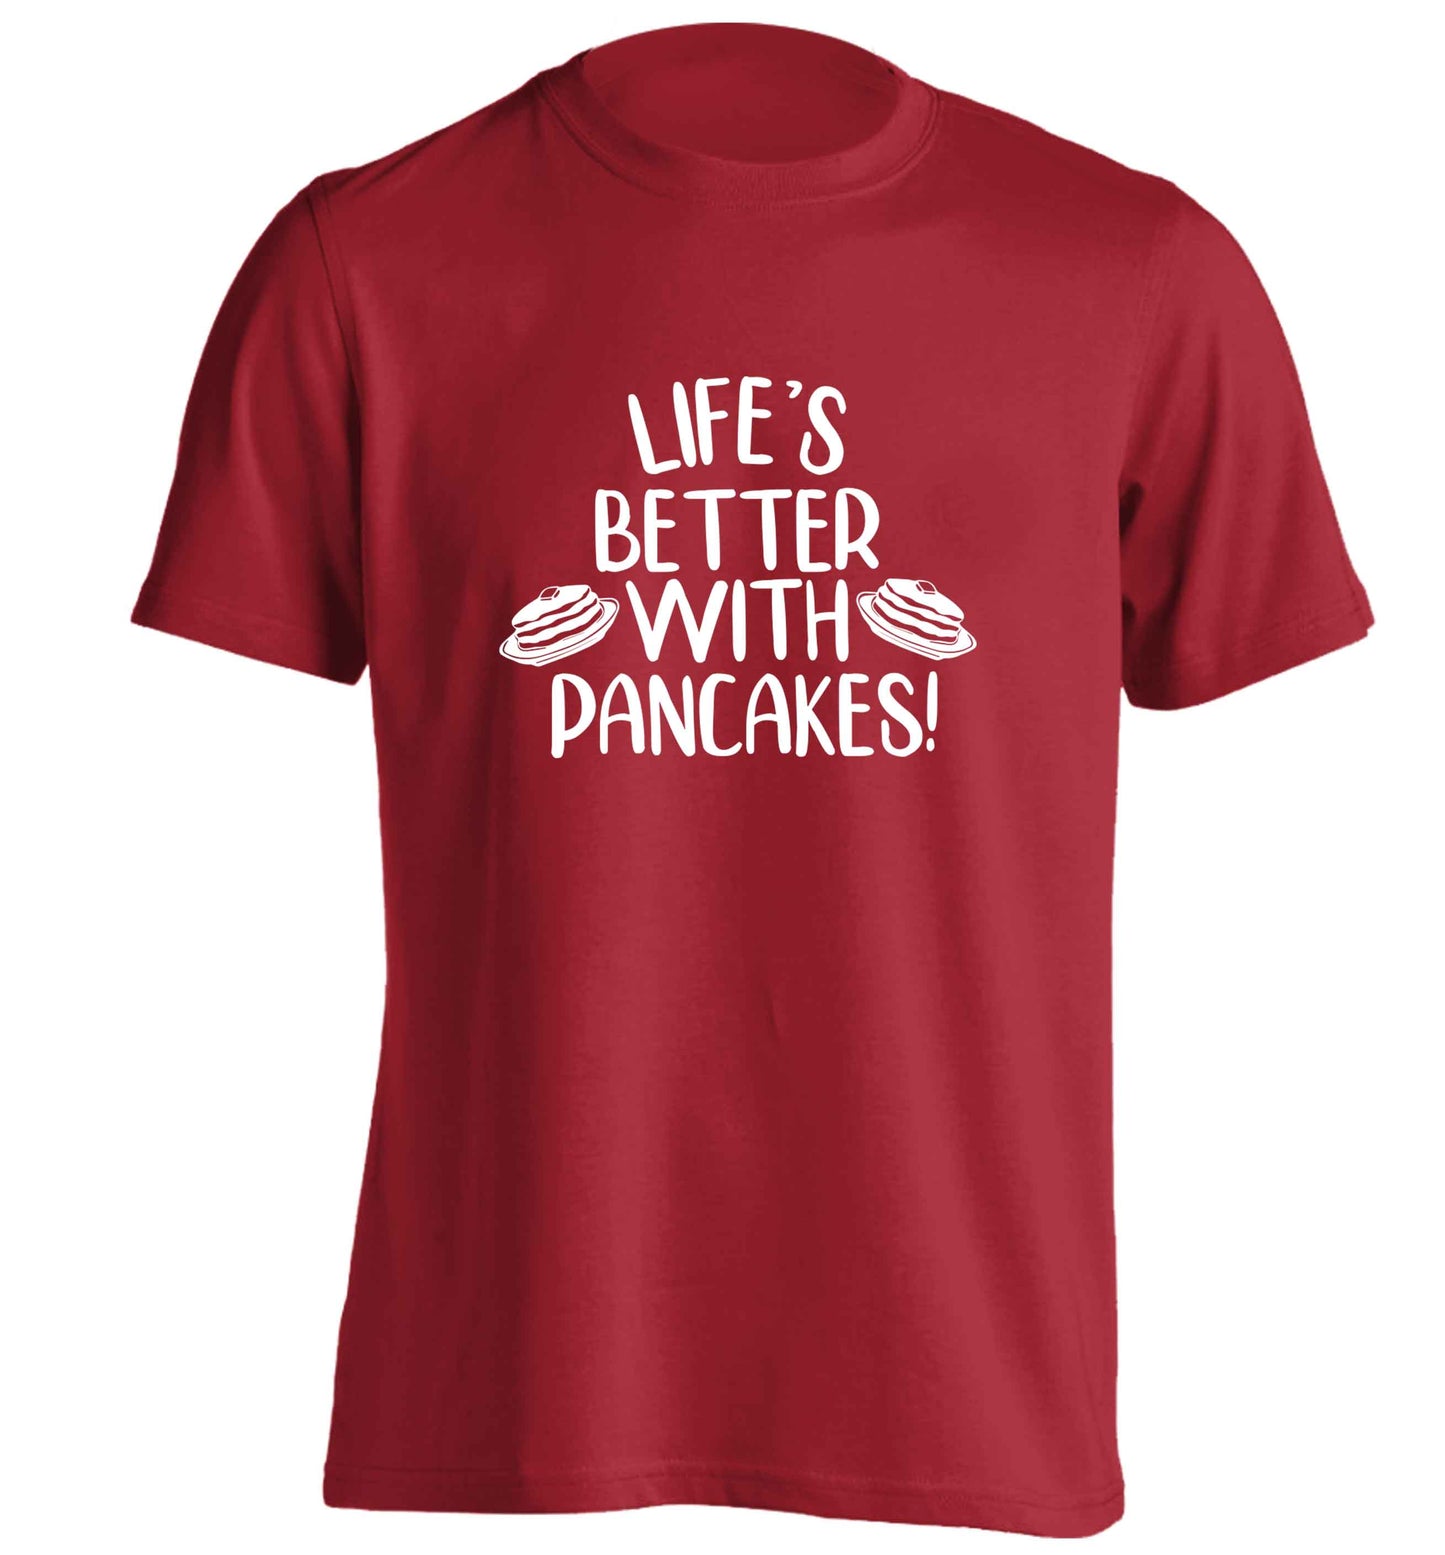 Life's better with pancakes adults unisex red Tshirt 2XL